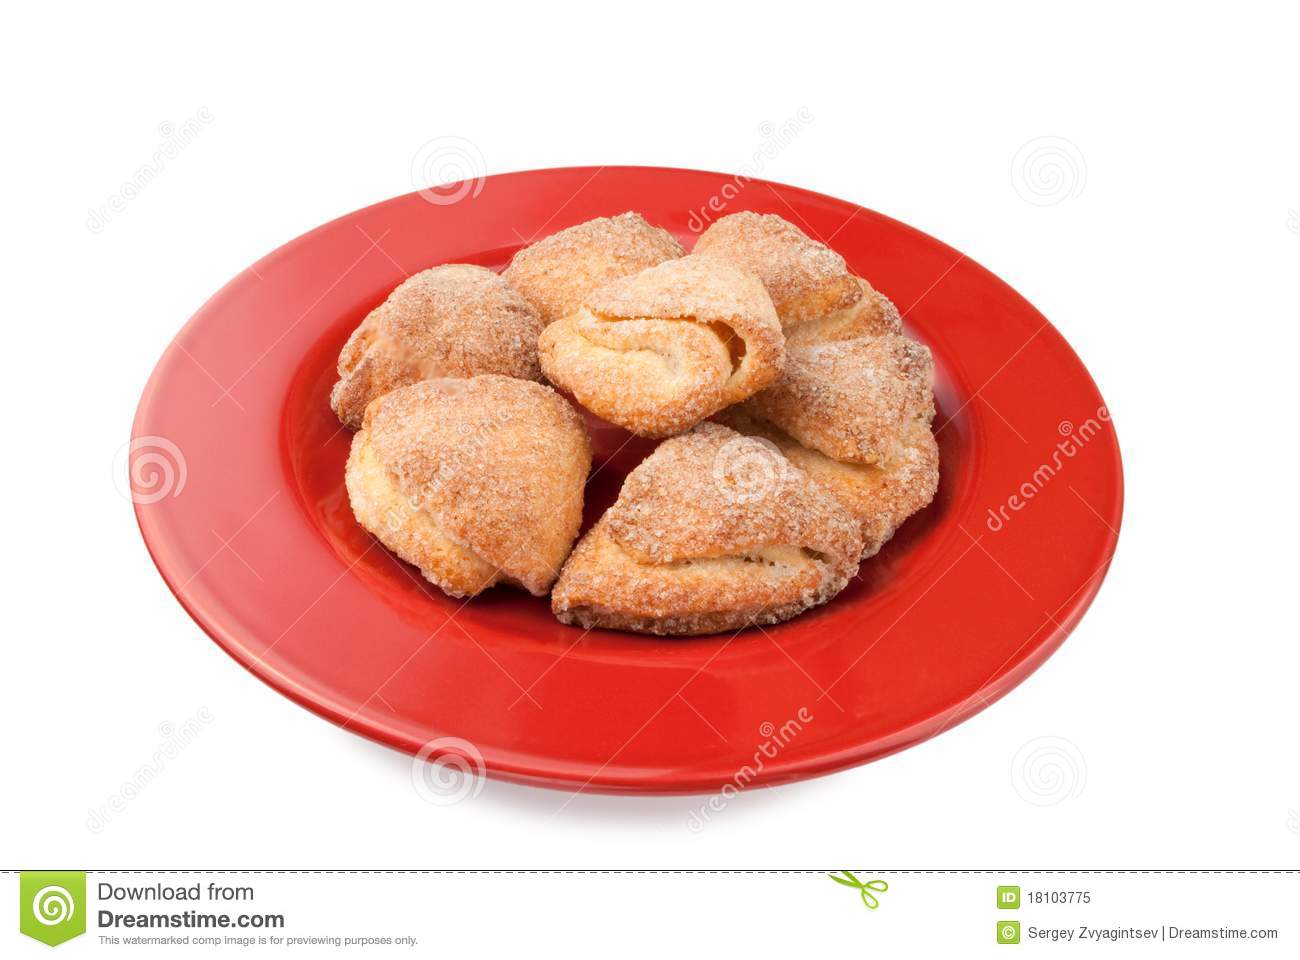 Cookies On Red Plate Royalty Free Stock Photo   Image  18103775